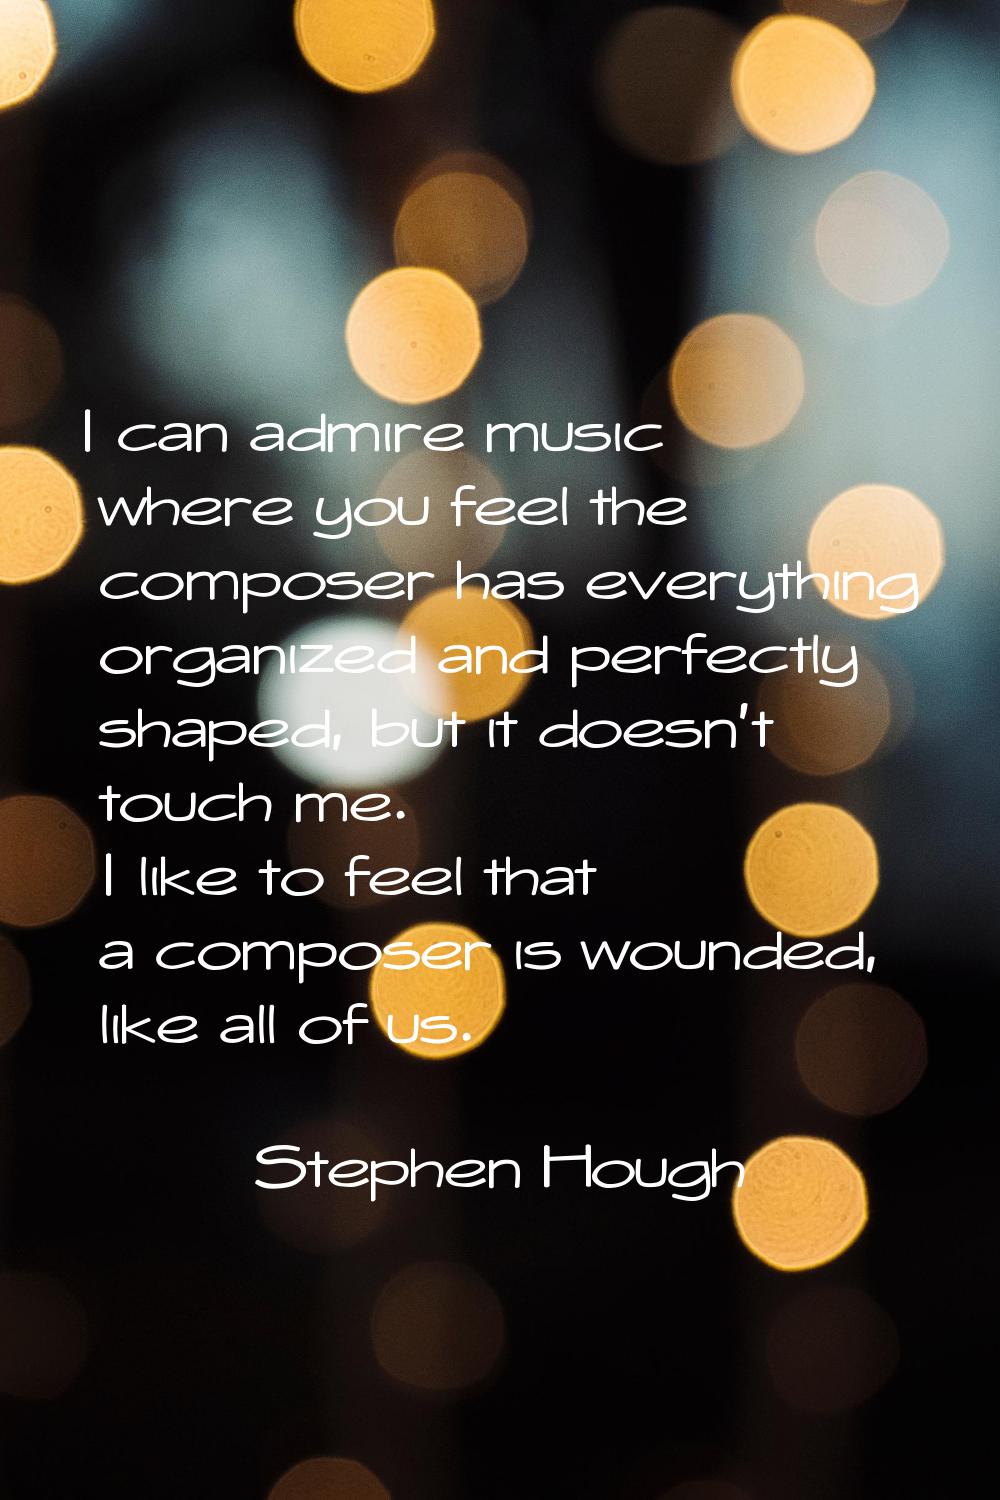 I can admire music where you feel the composer has everything organized and perfectly shaped, but i